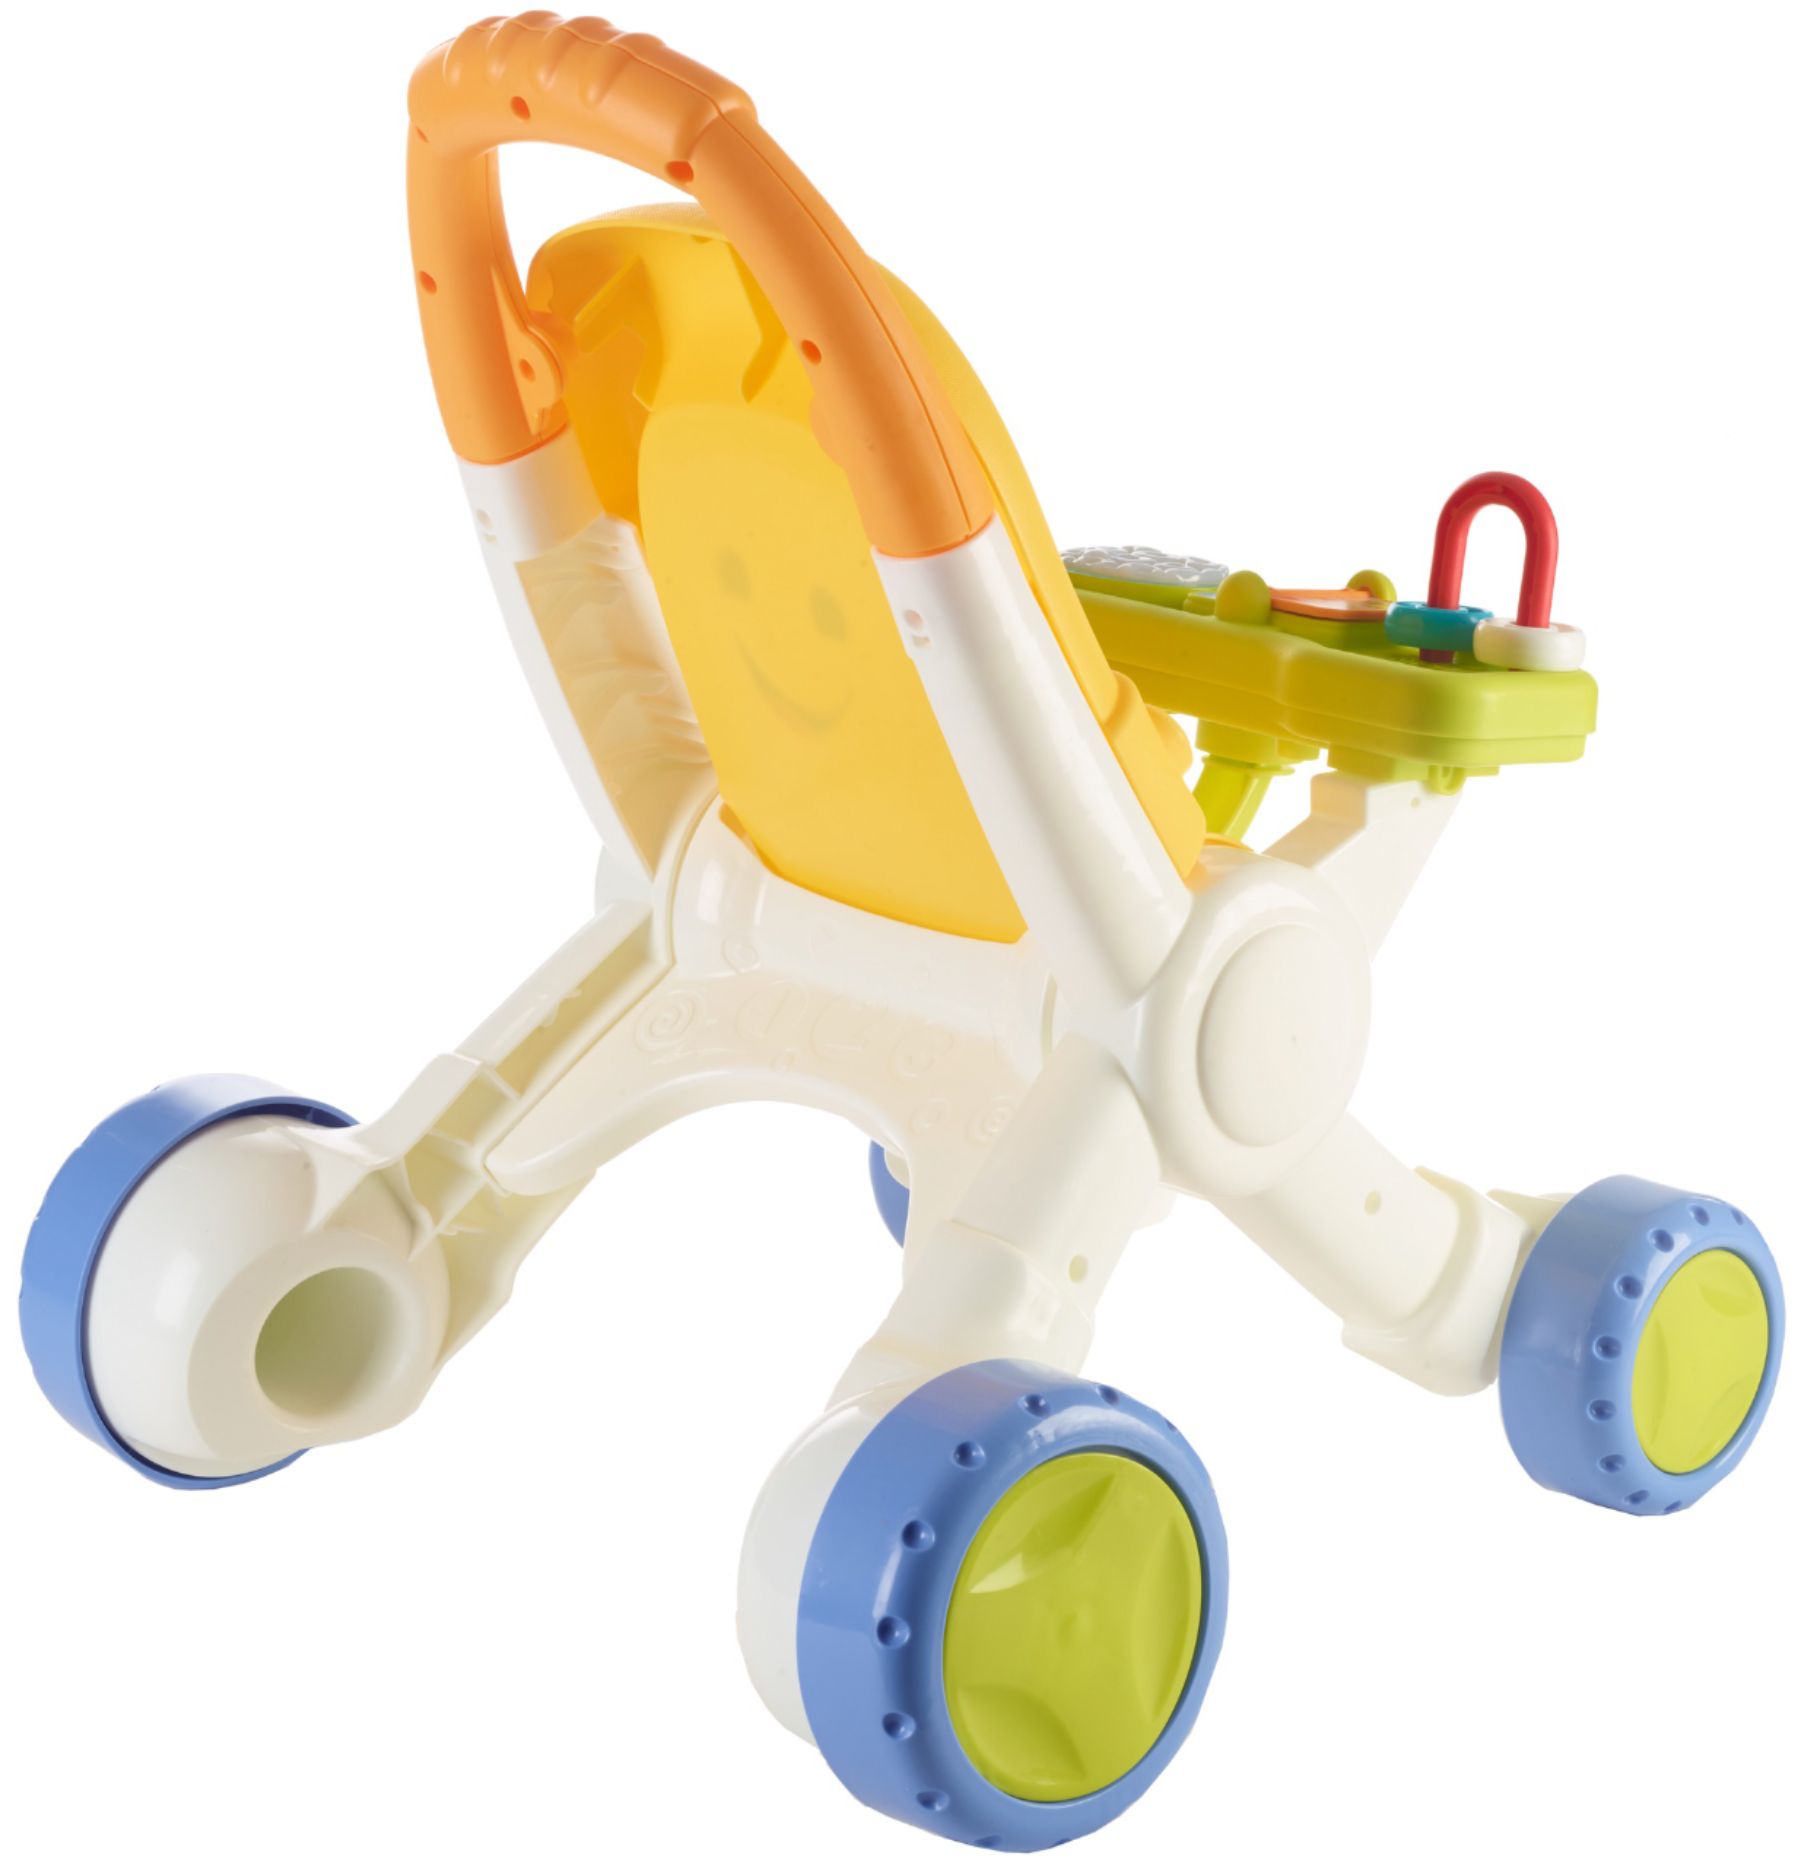 fisher price laugh and learn stroll and learn walker